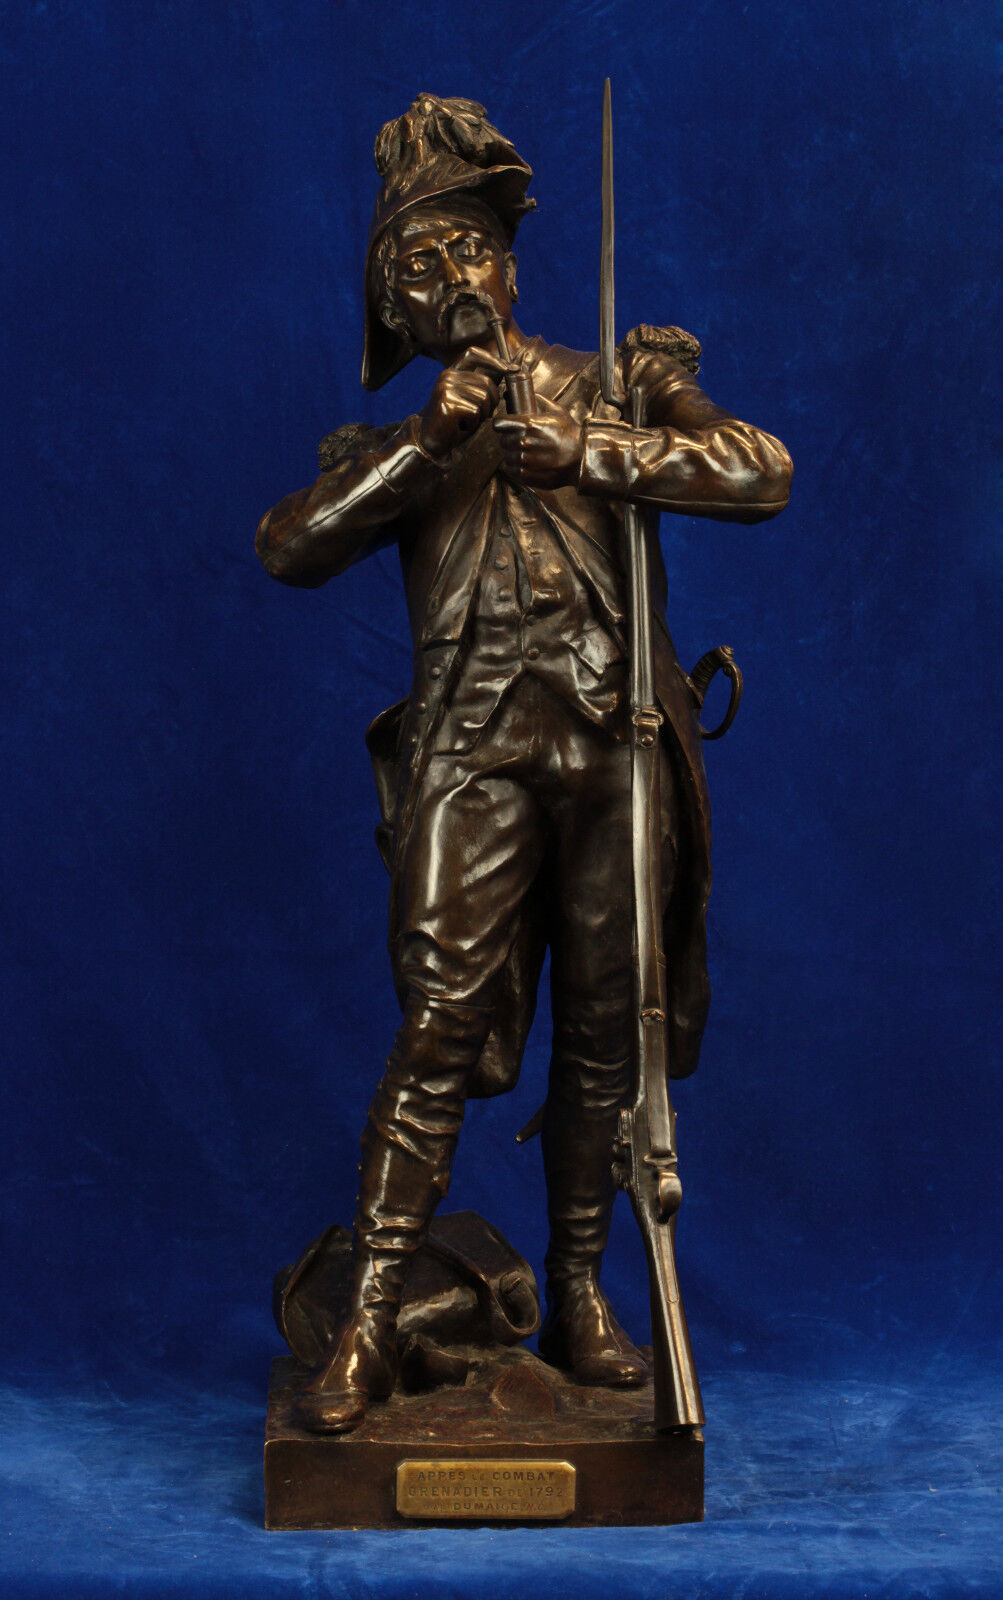 19th C. Statue of Combat Grenadier Soldier Smoking by H.C. Dumaige (1830 - 1888)